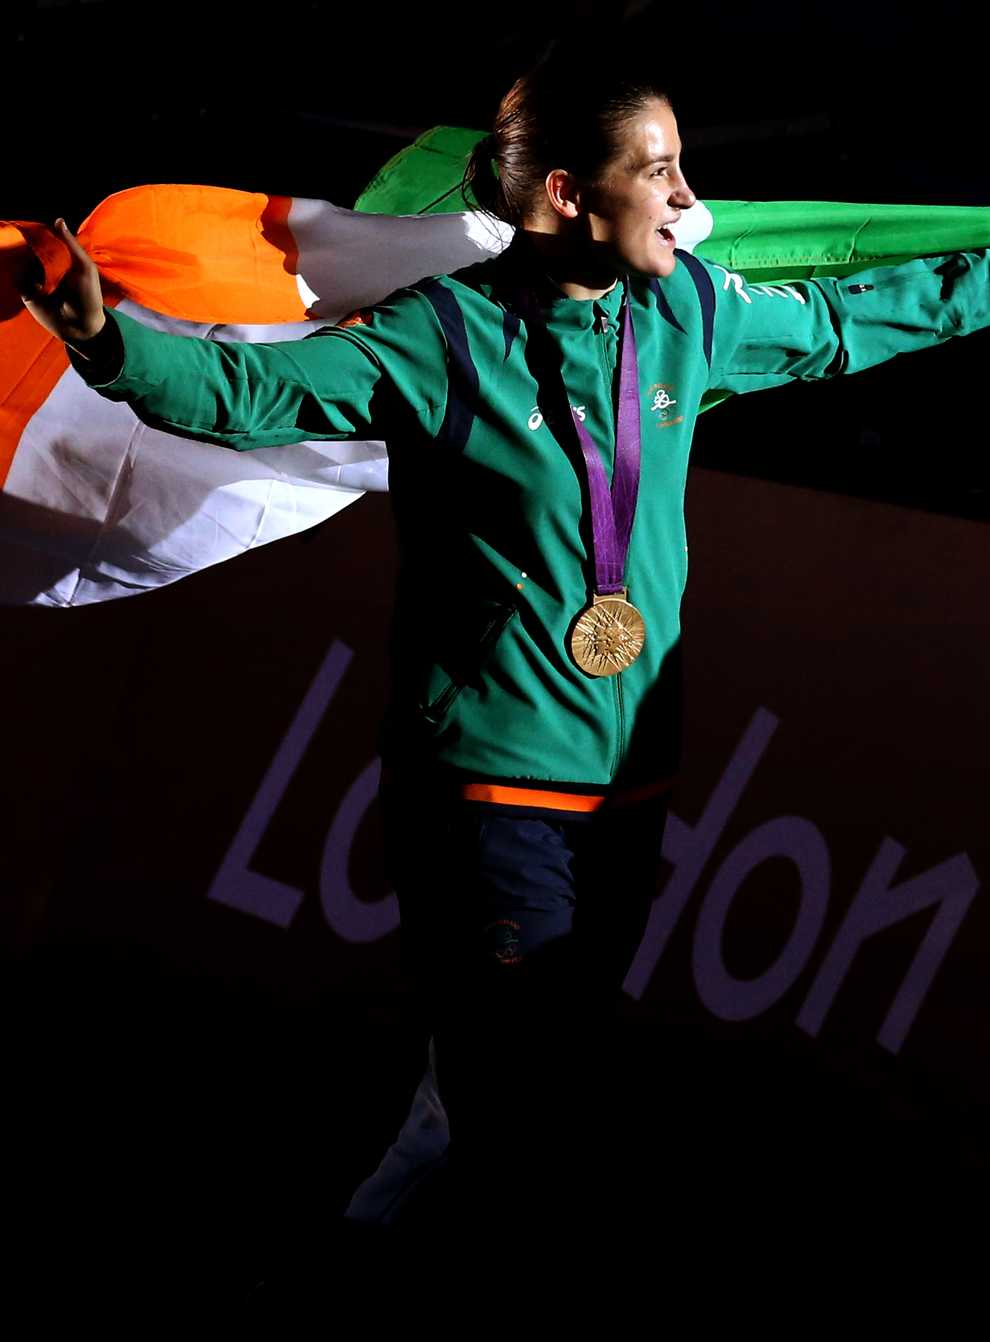 Katie Taylor is one of Ireland's top sports stars (PA Images)